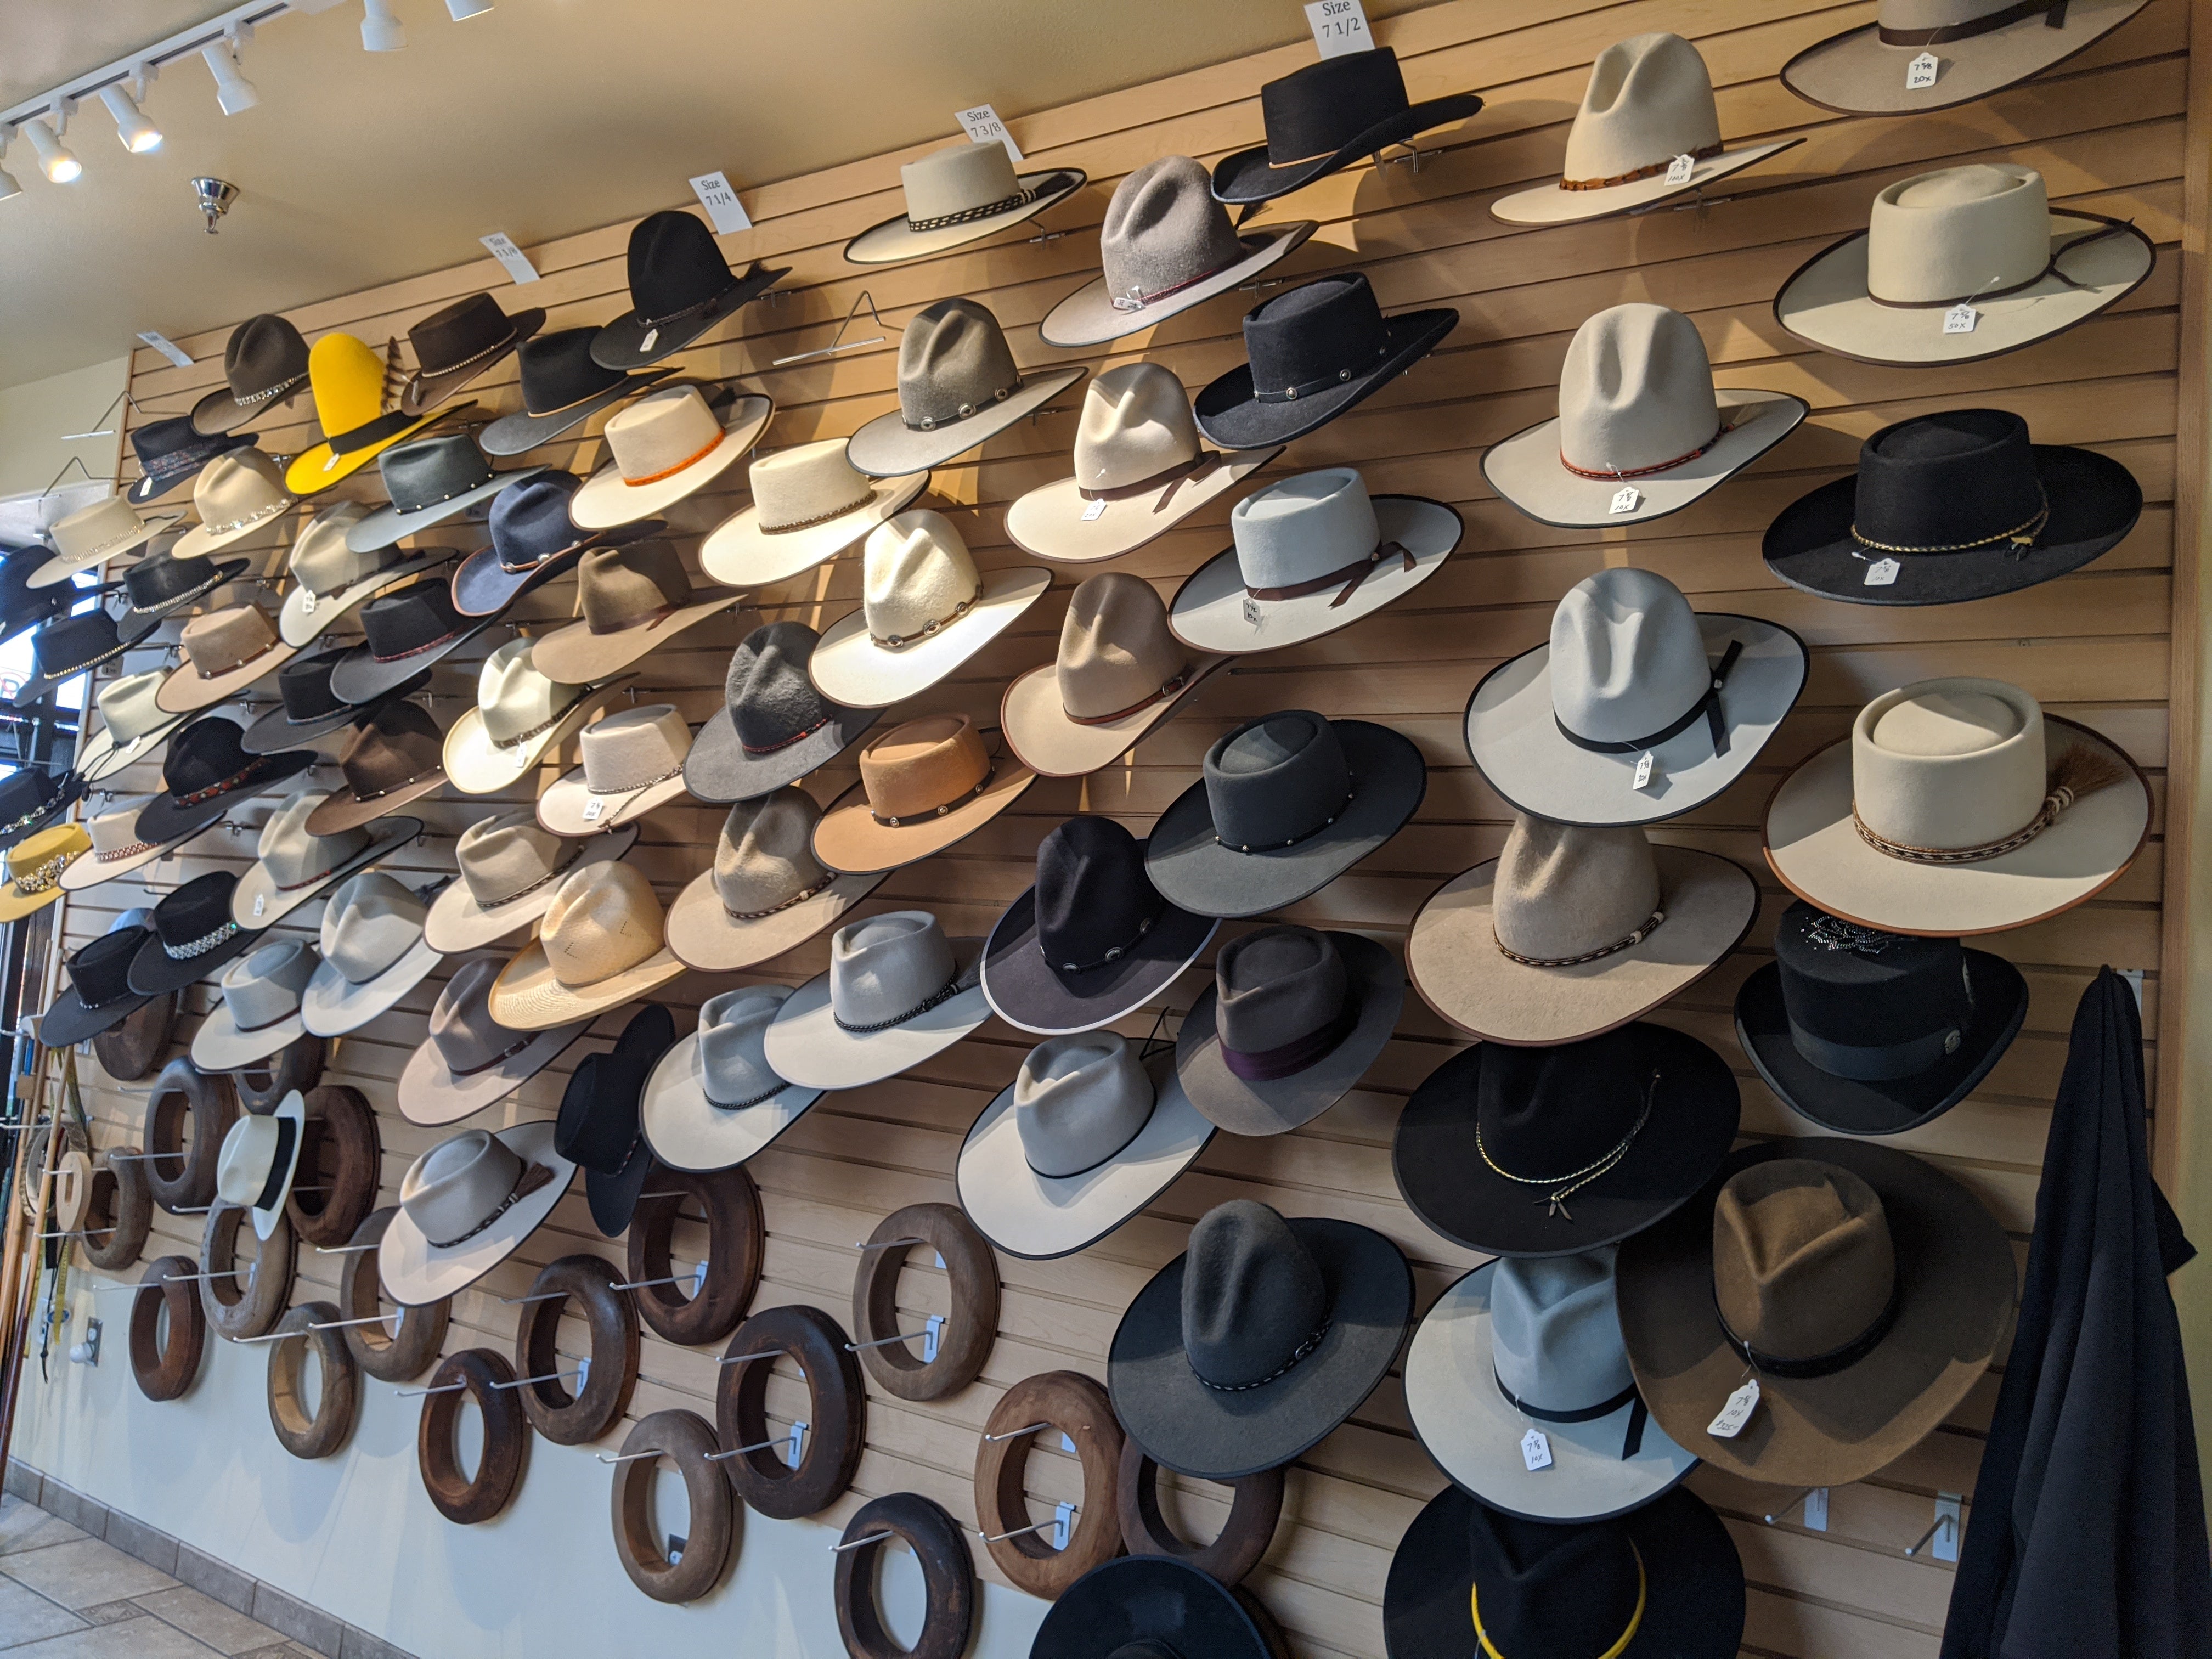 Compare prices for Cowboy Hat (MP2272) in official stores